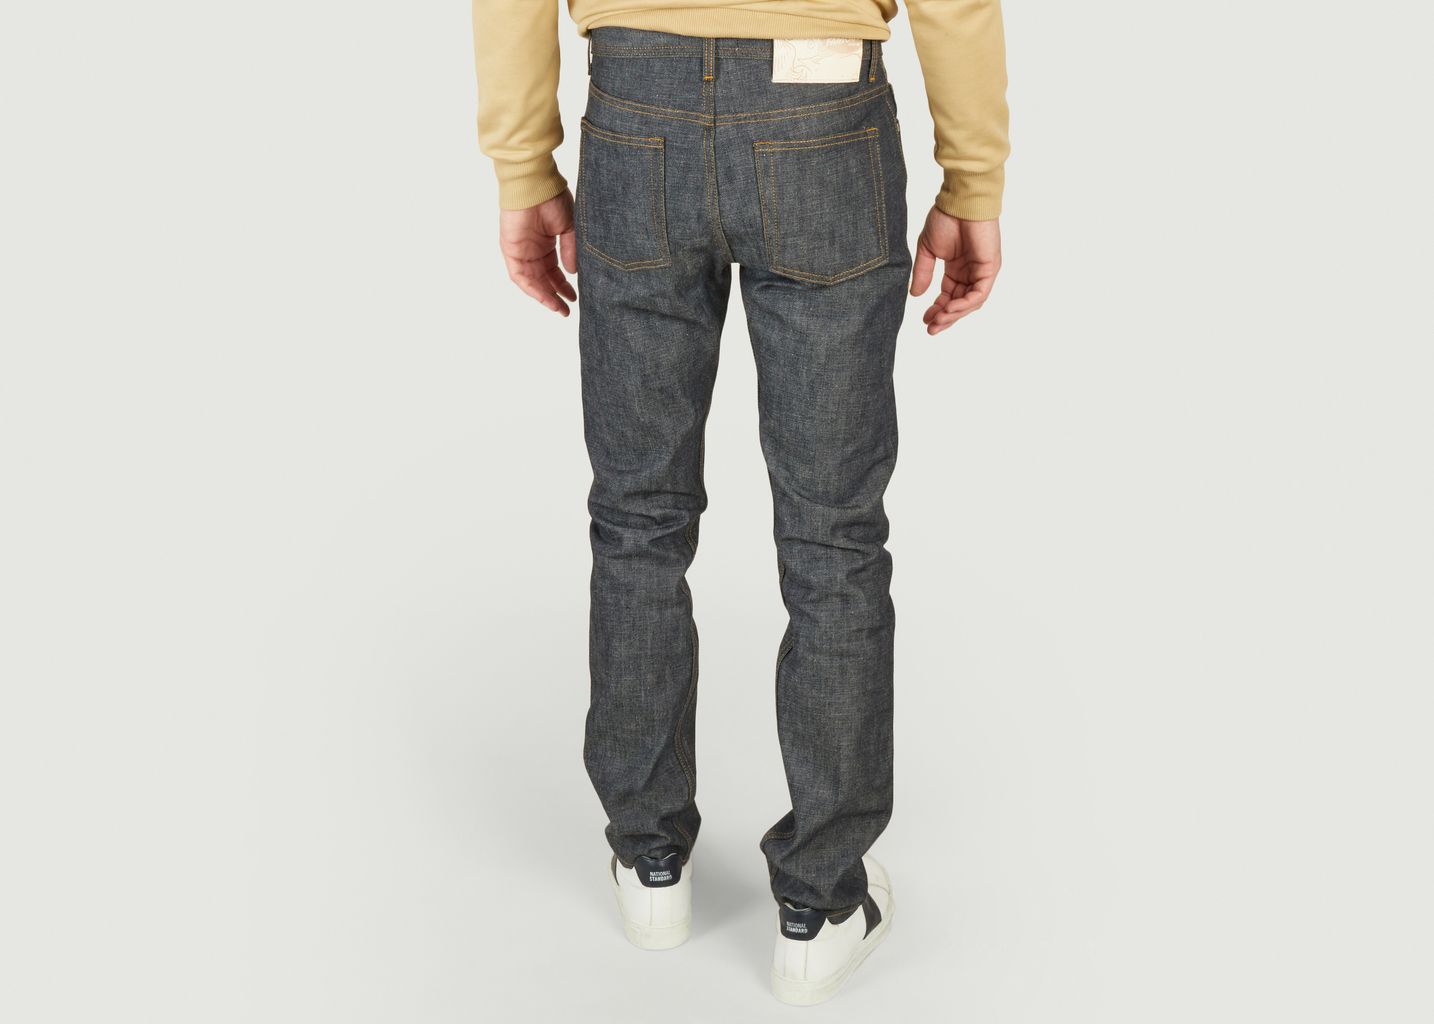 Jean Tried & True Selvedge Weird Guy - Naked and Famous